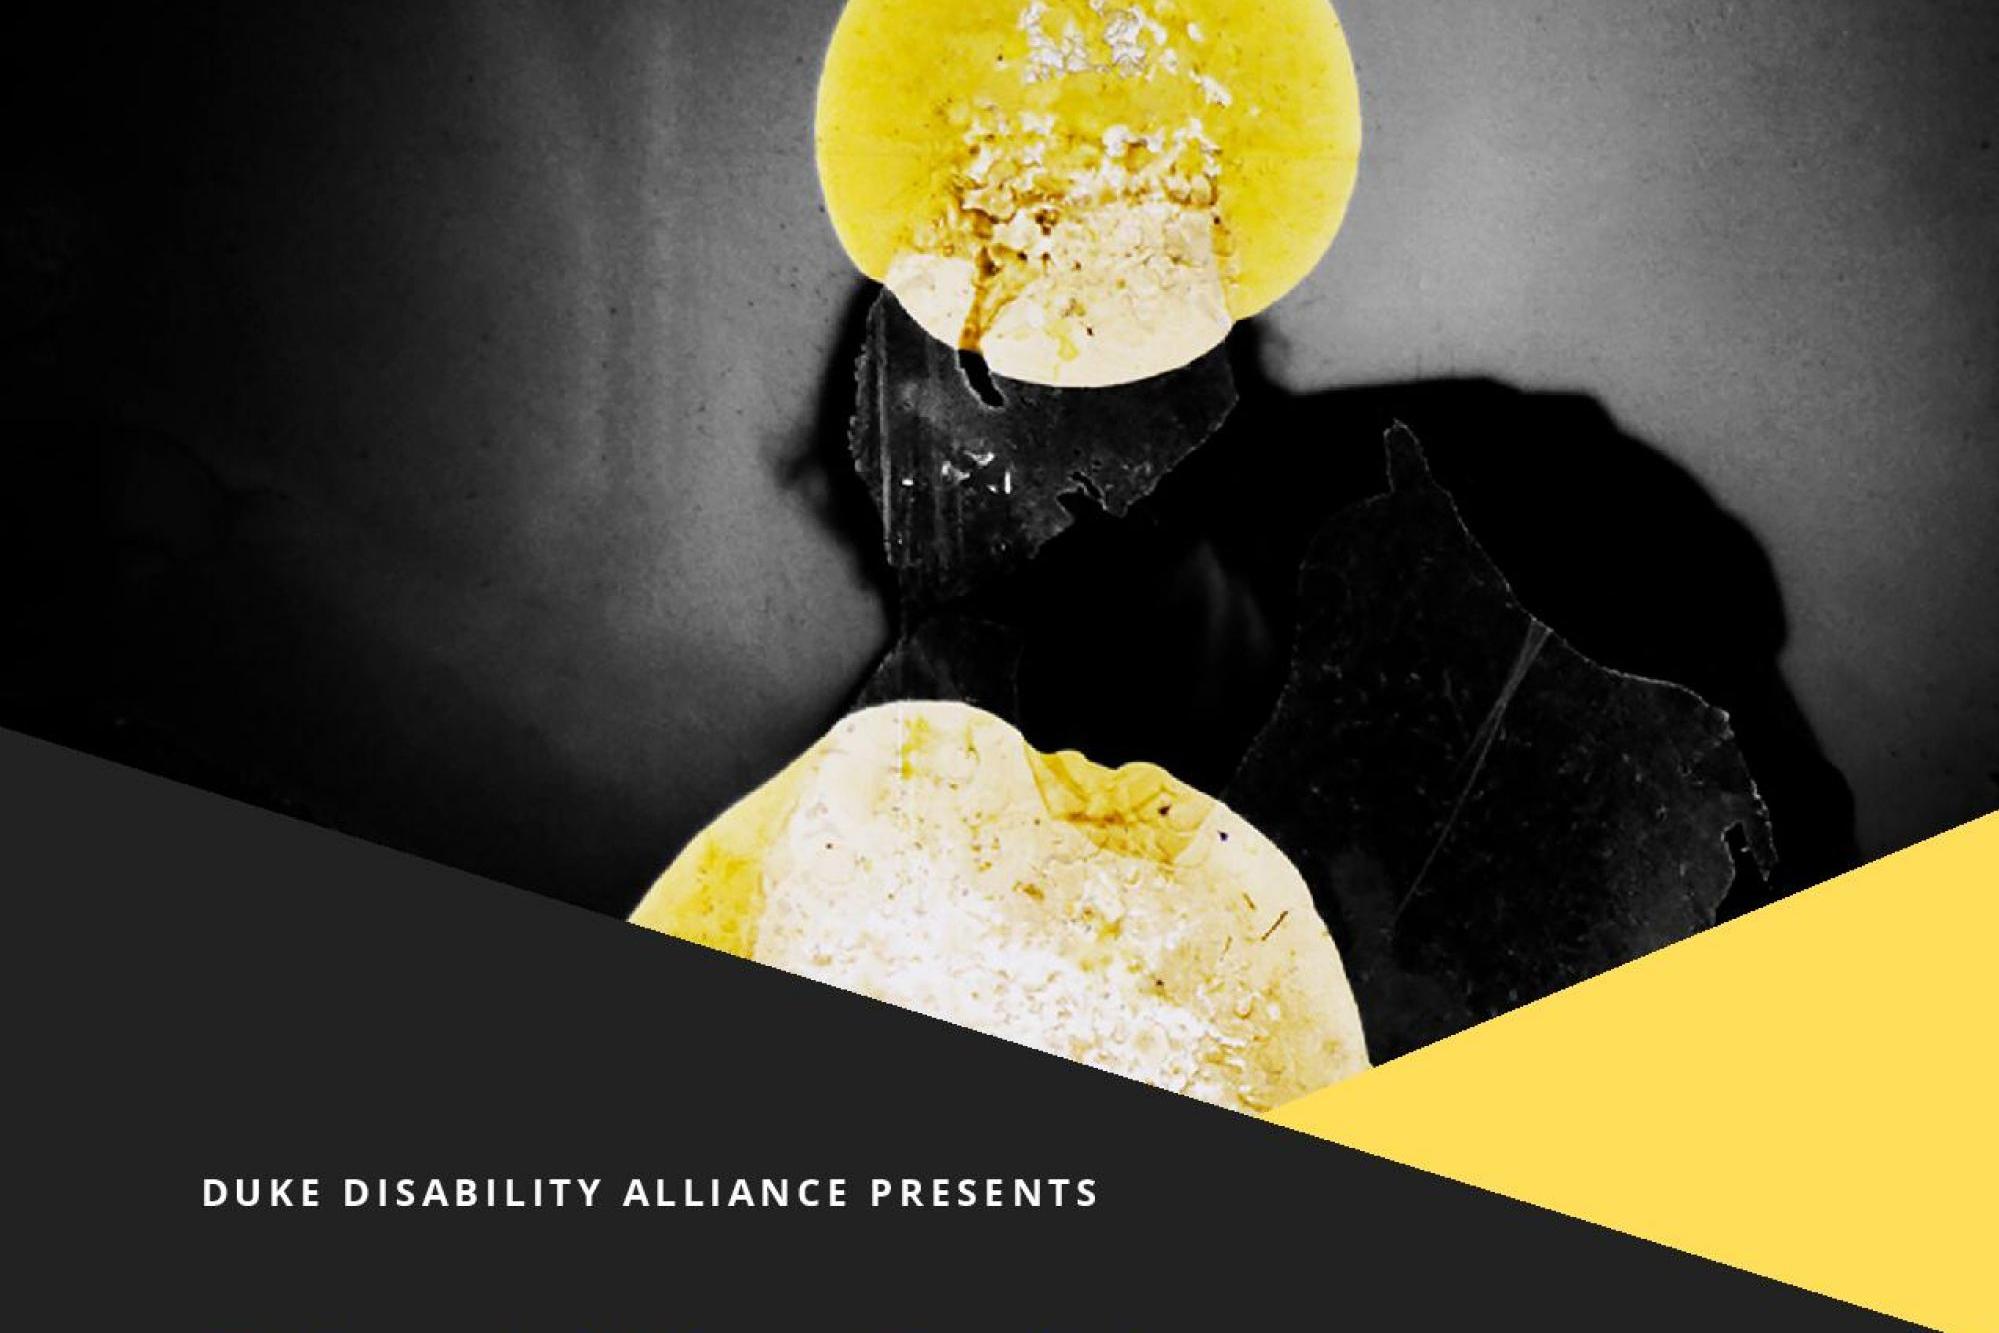 Image of yellow and black shapes with the text that says "Duke Disability Alliance Presents"